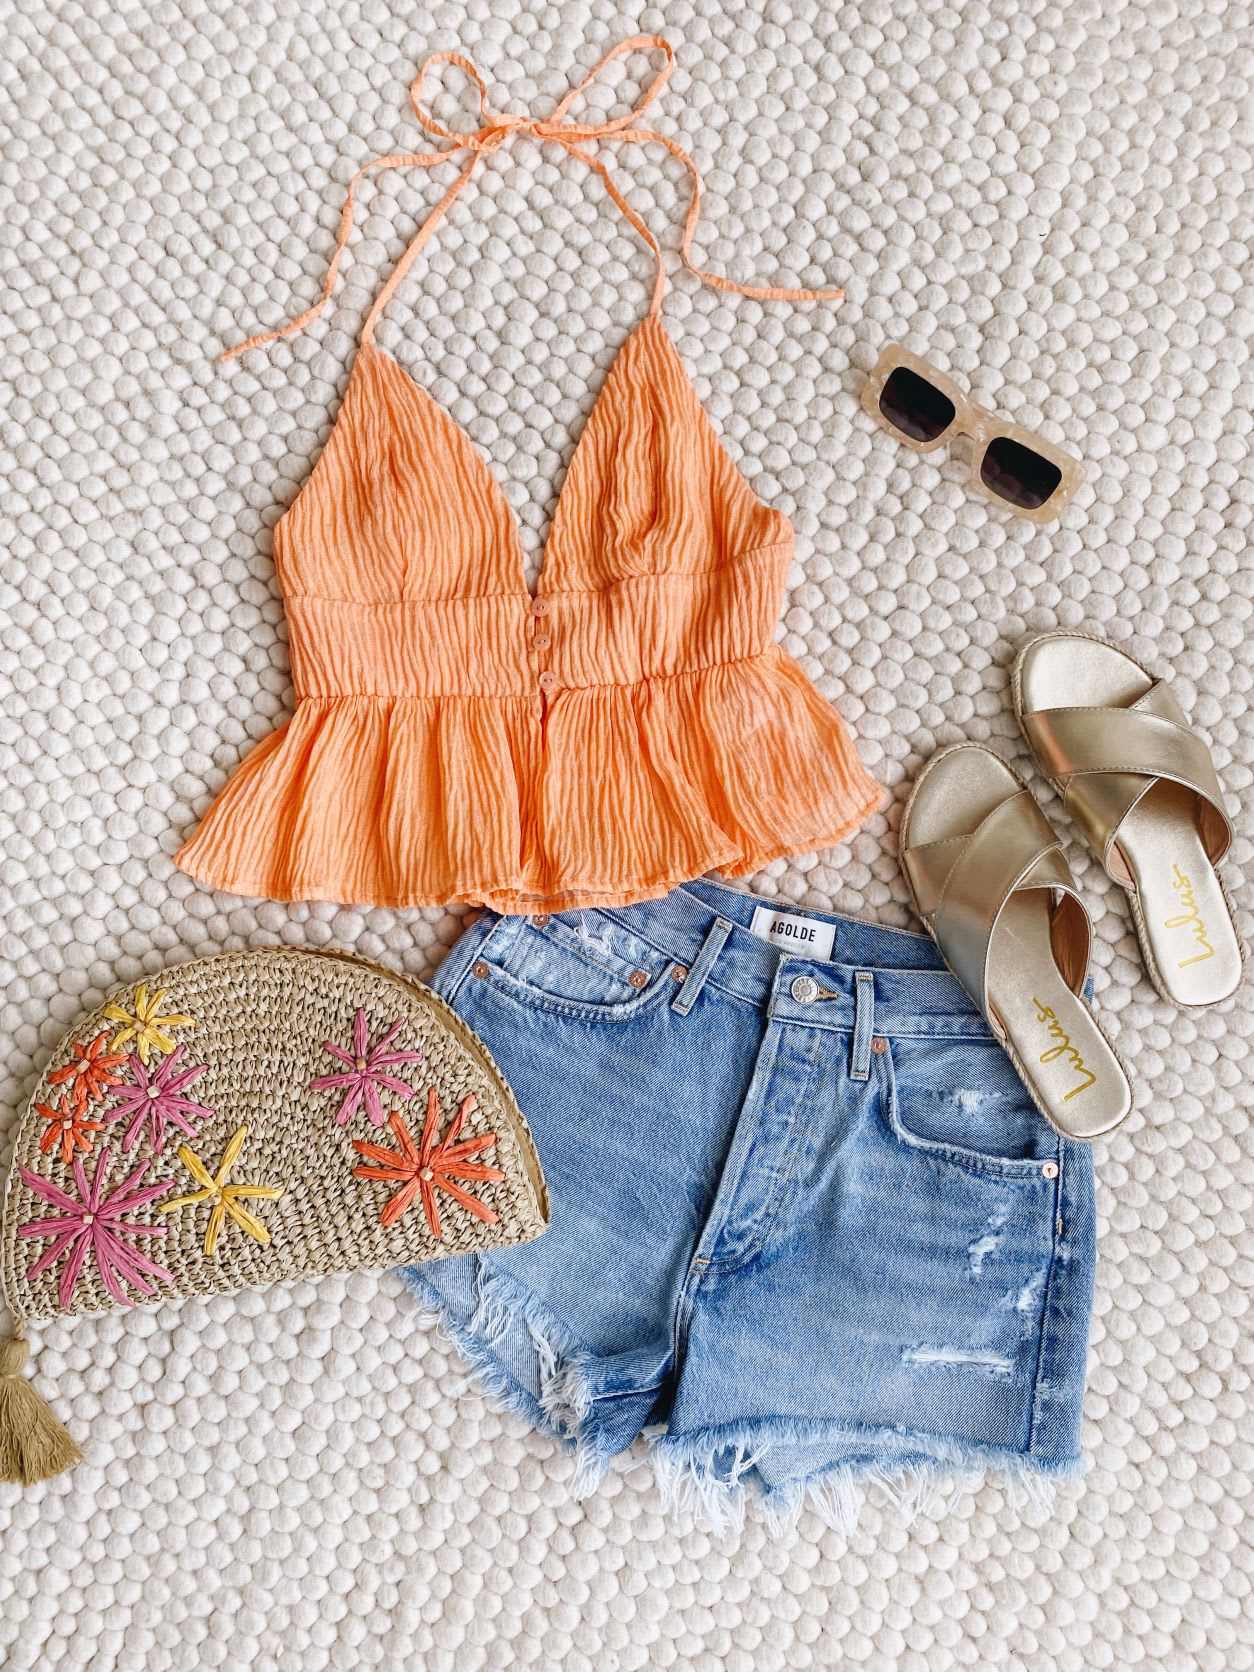 What To Wear To The Beach: Cute Outfits To Copy ASAP - Lulus.com ...